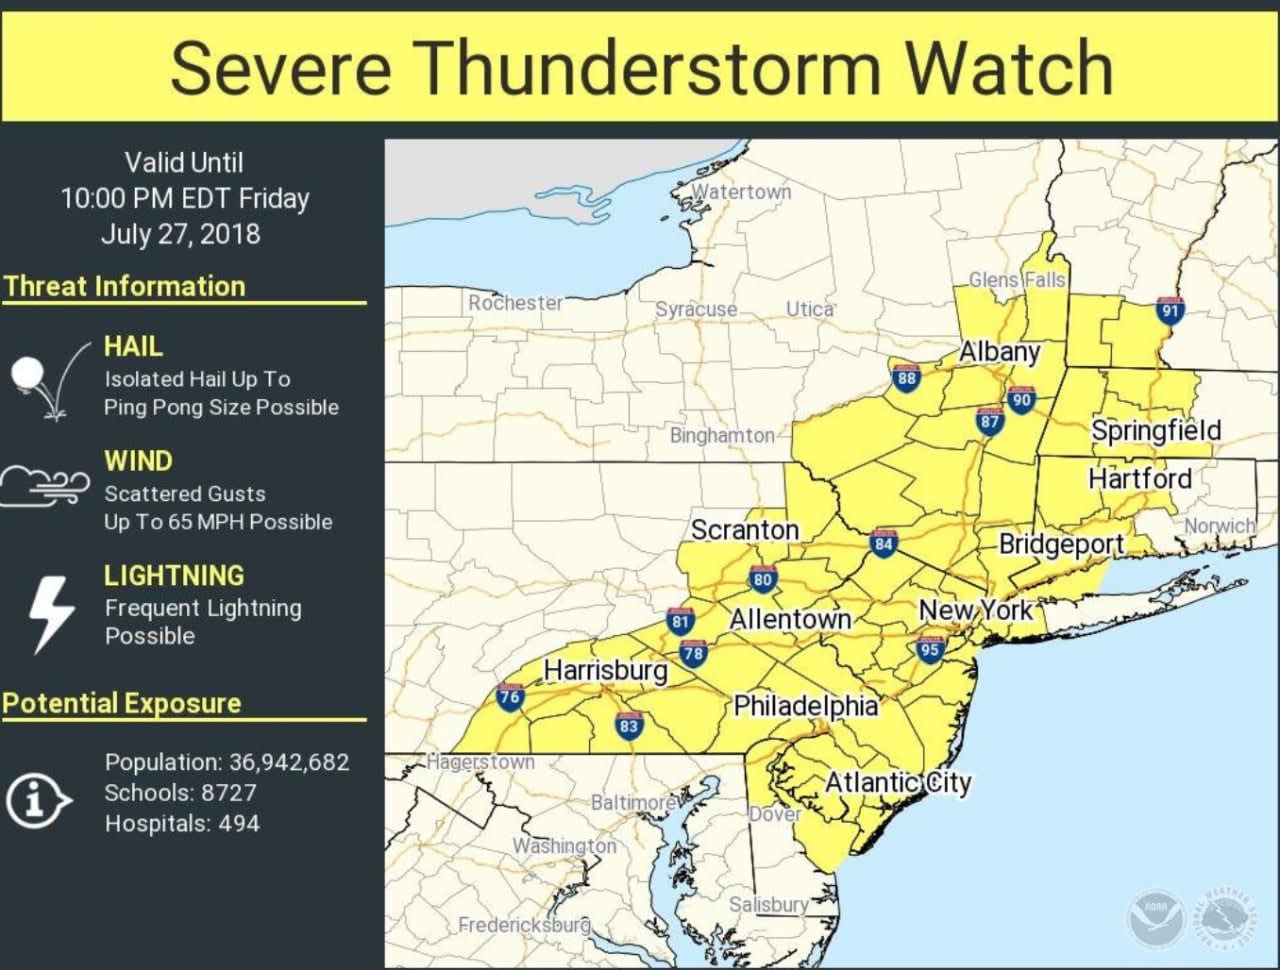 A look at the areas where the Severe Thunderstorm Watch is in effect.